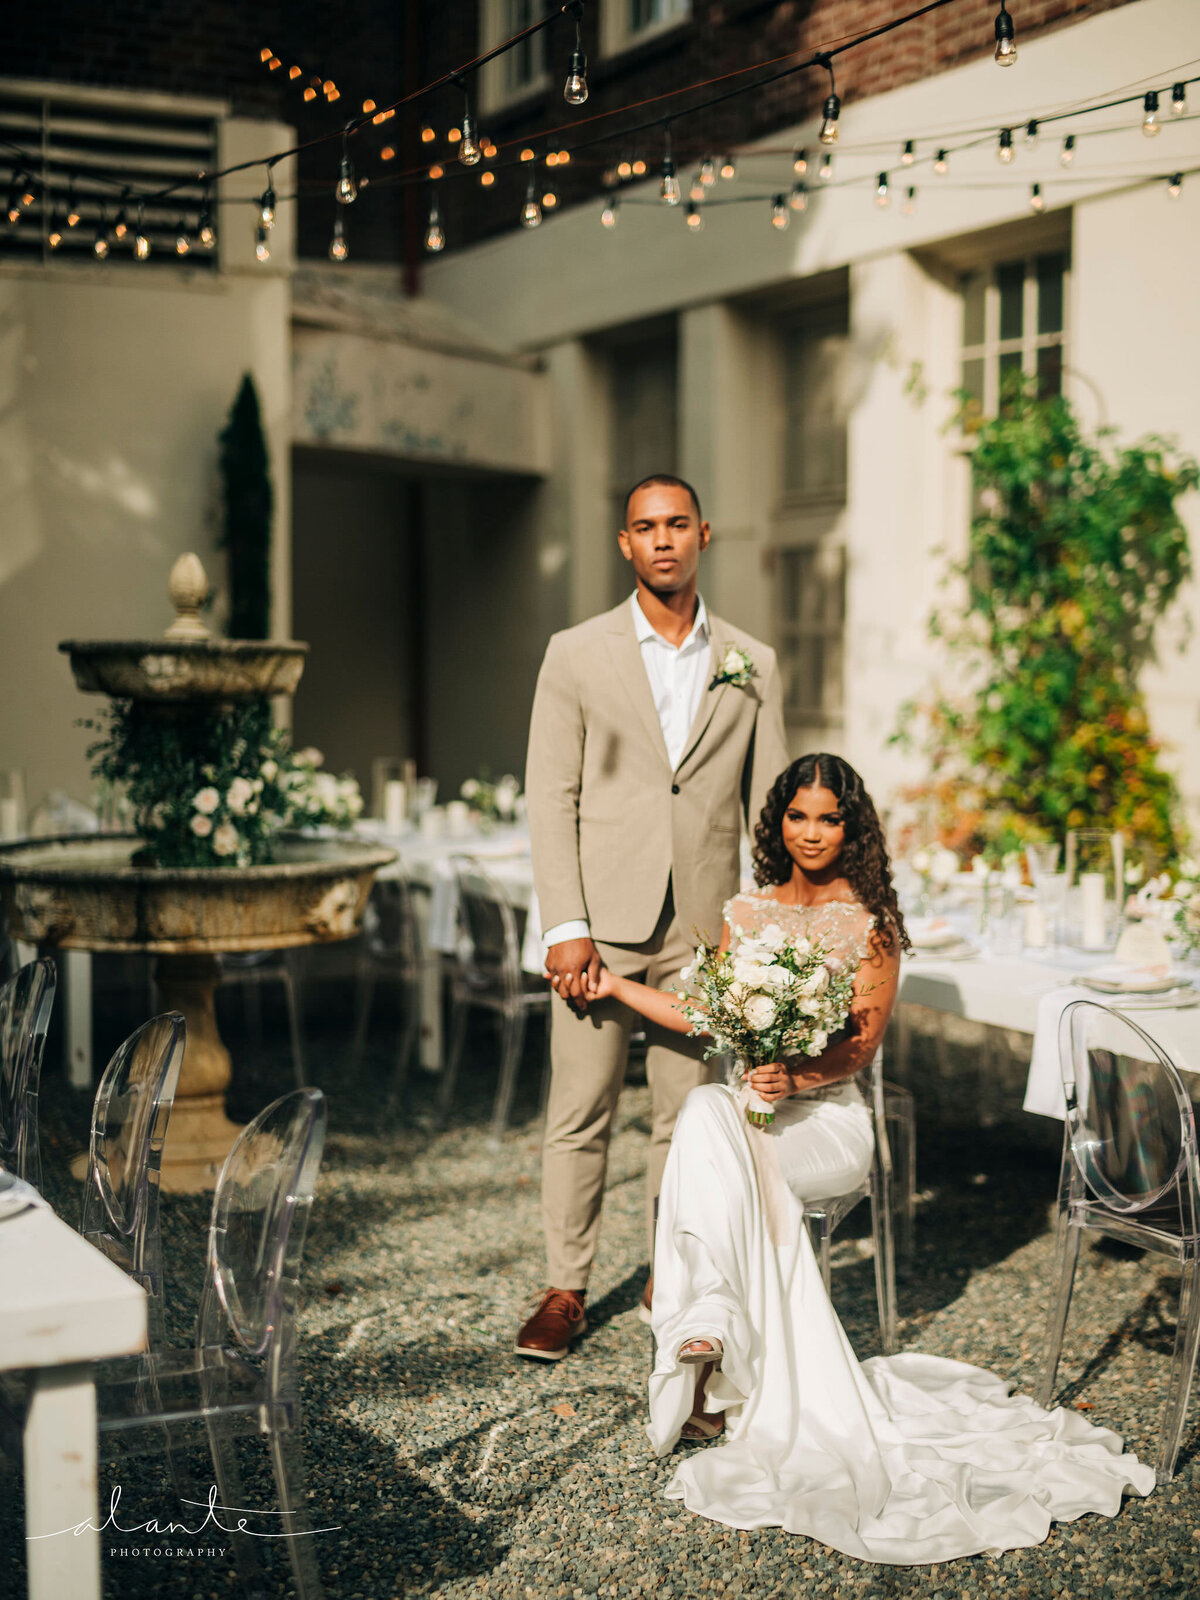 Modern Chateau Wedding at The Hall at Fauntleroy - 13